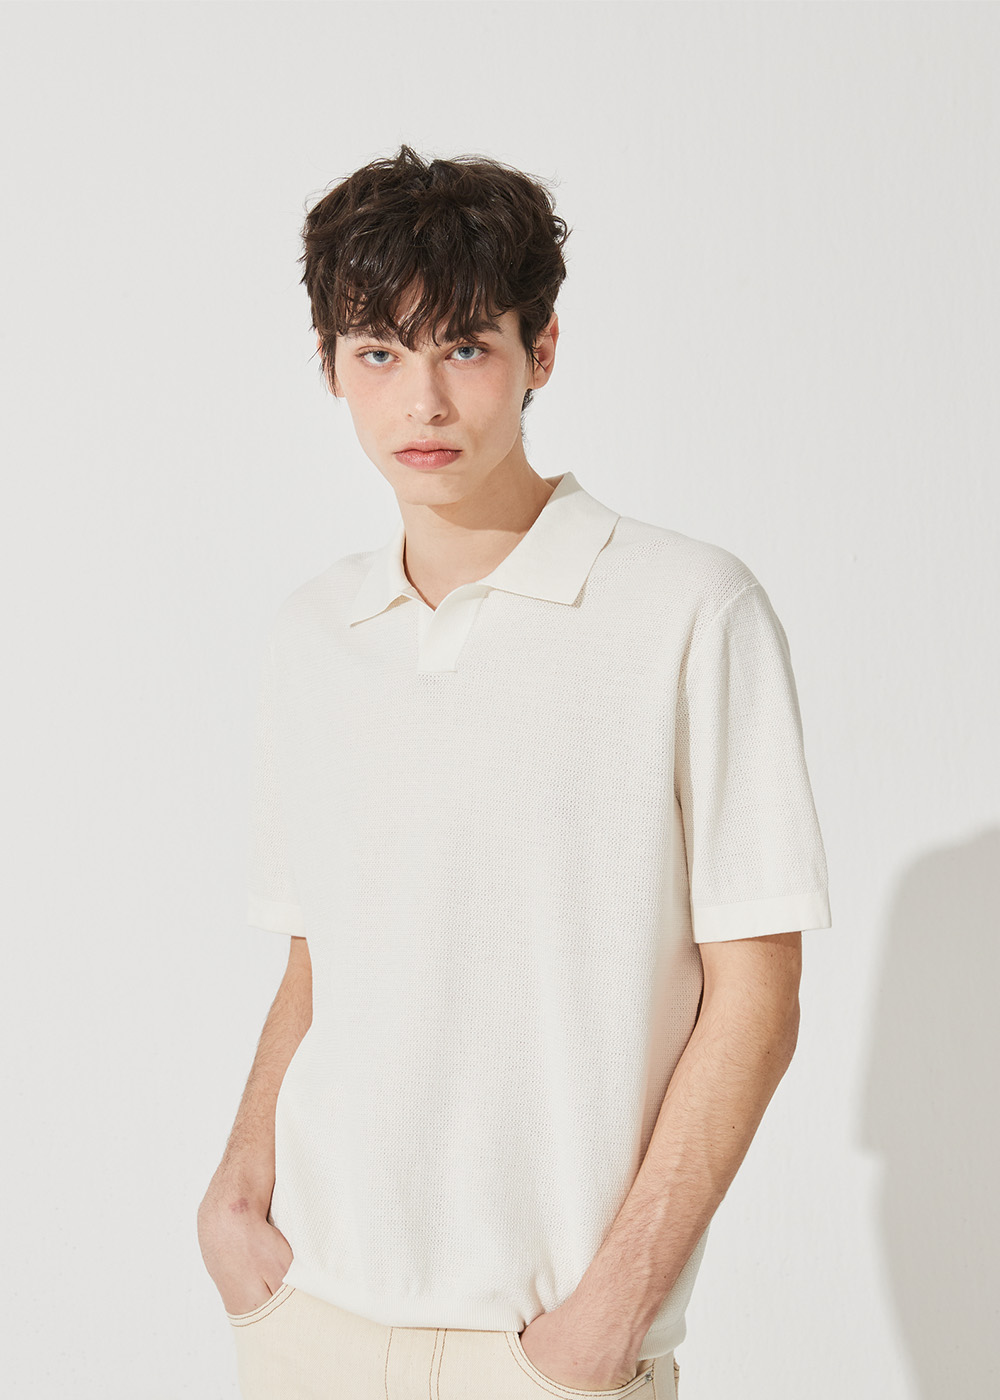 Texture  open shirt pullover (white)